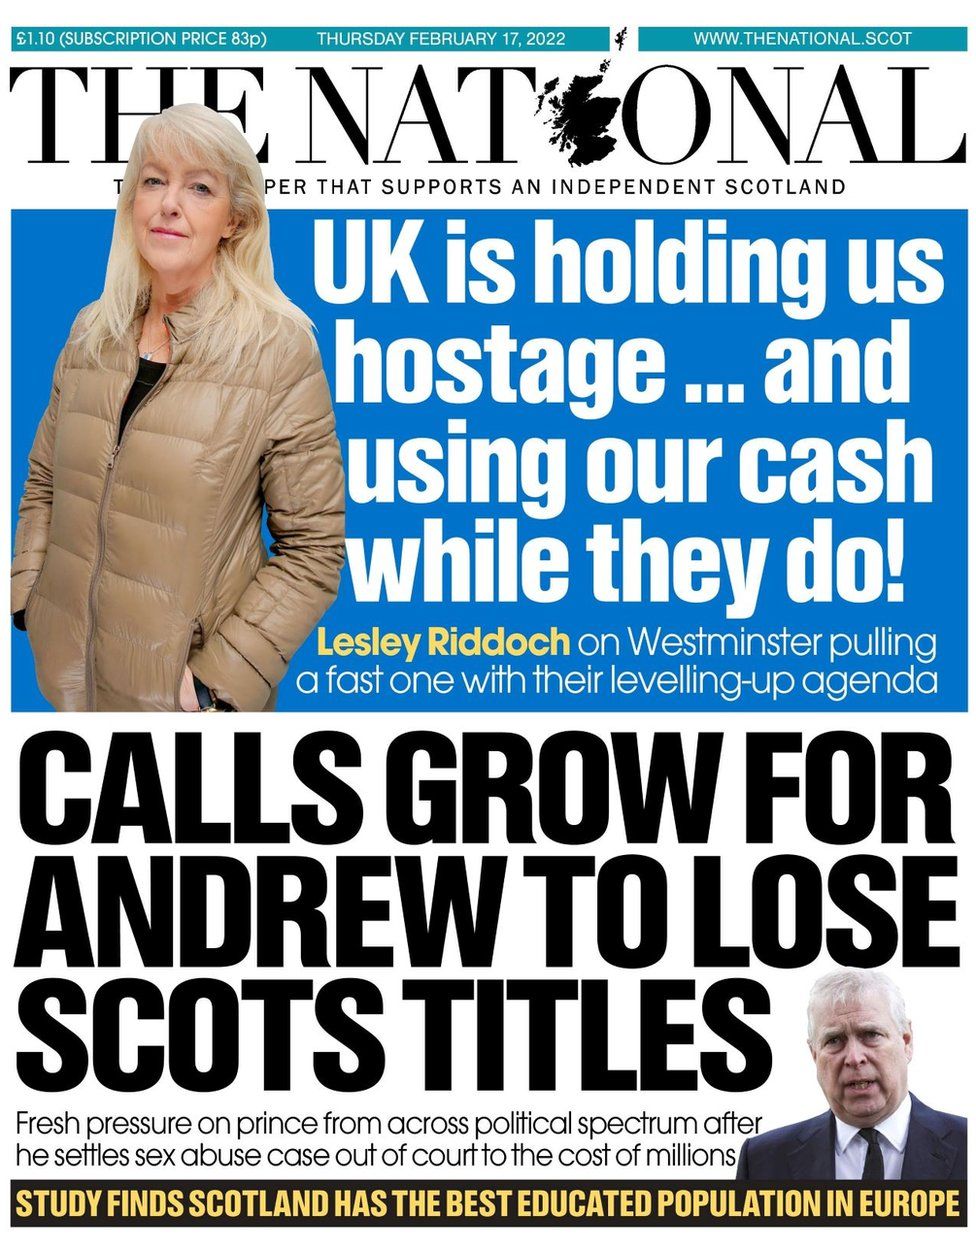 Scotland's papers: Queen's anguish and rising prices - BBC News